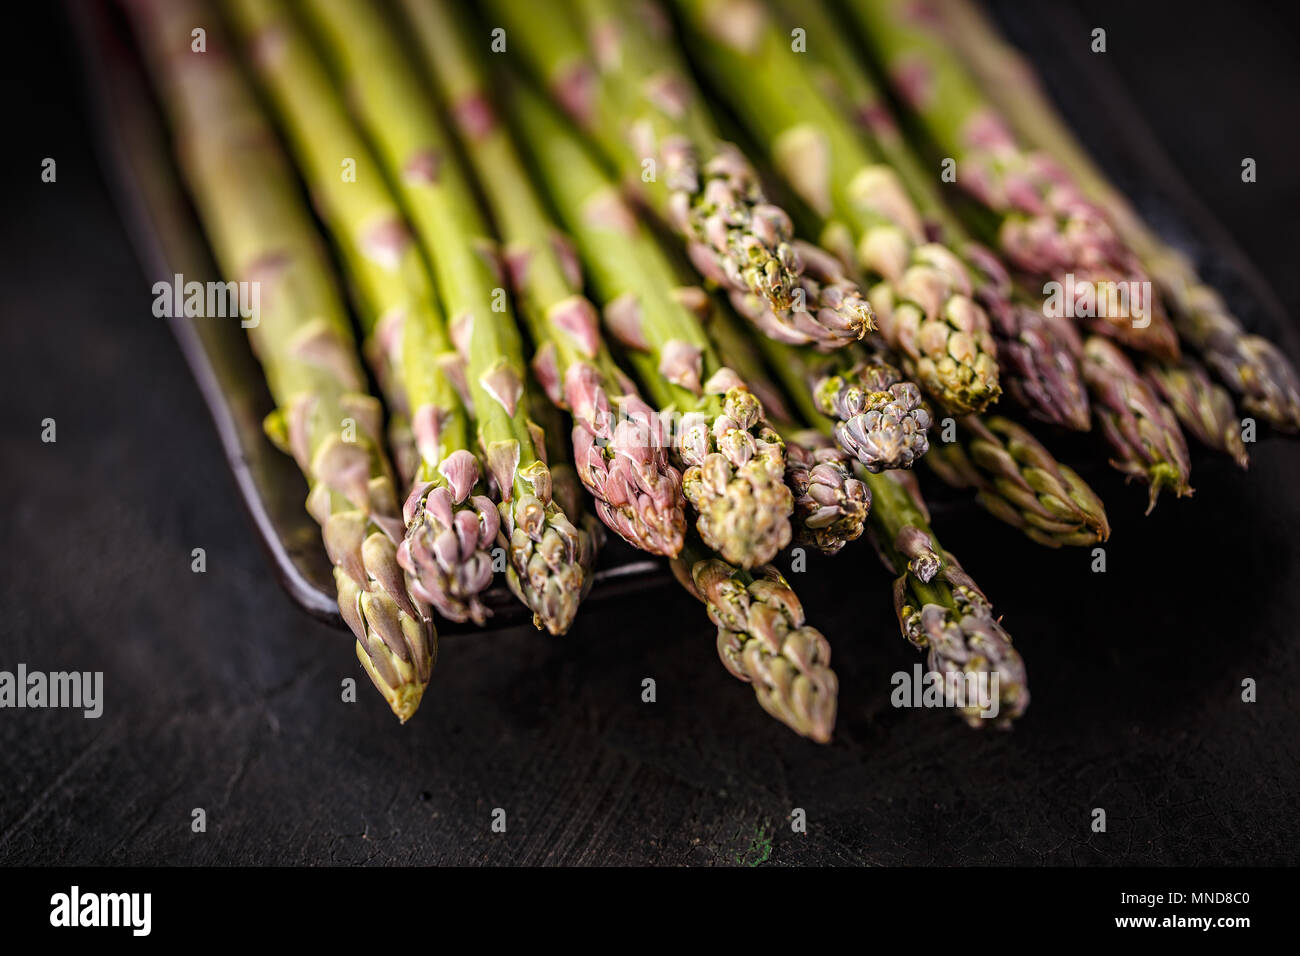 Bunch of fresh asparagus on black background, close up Stock Photo